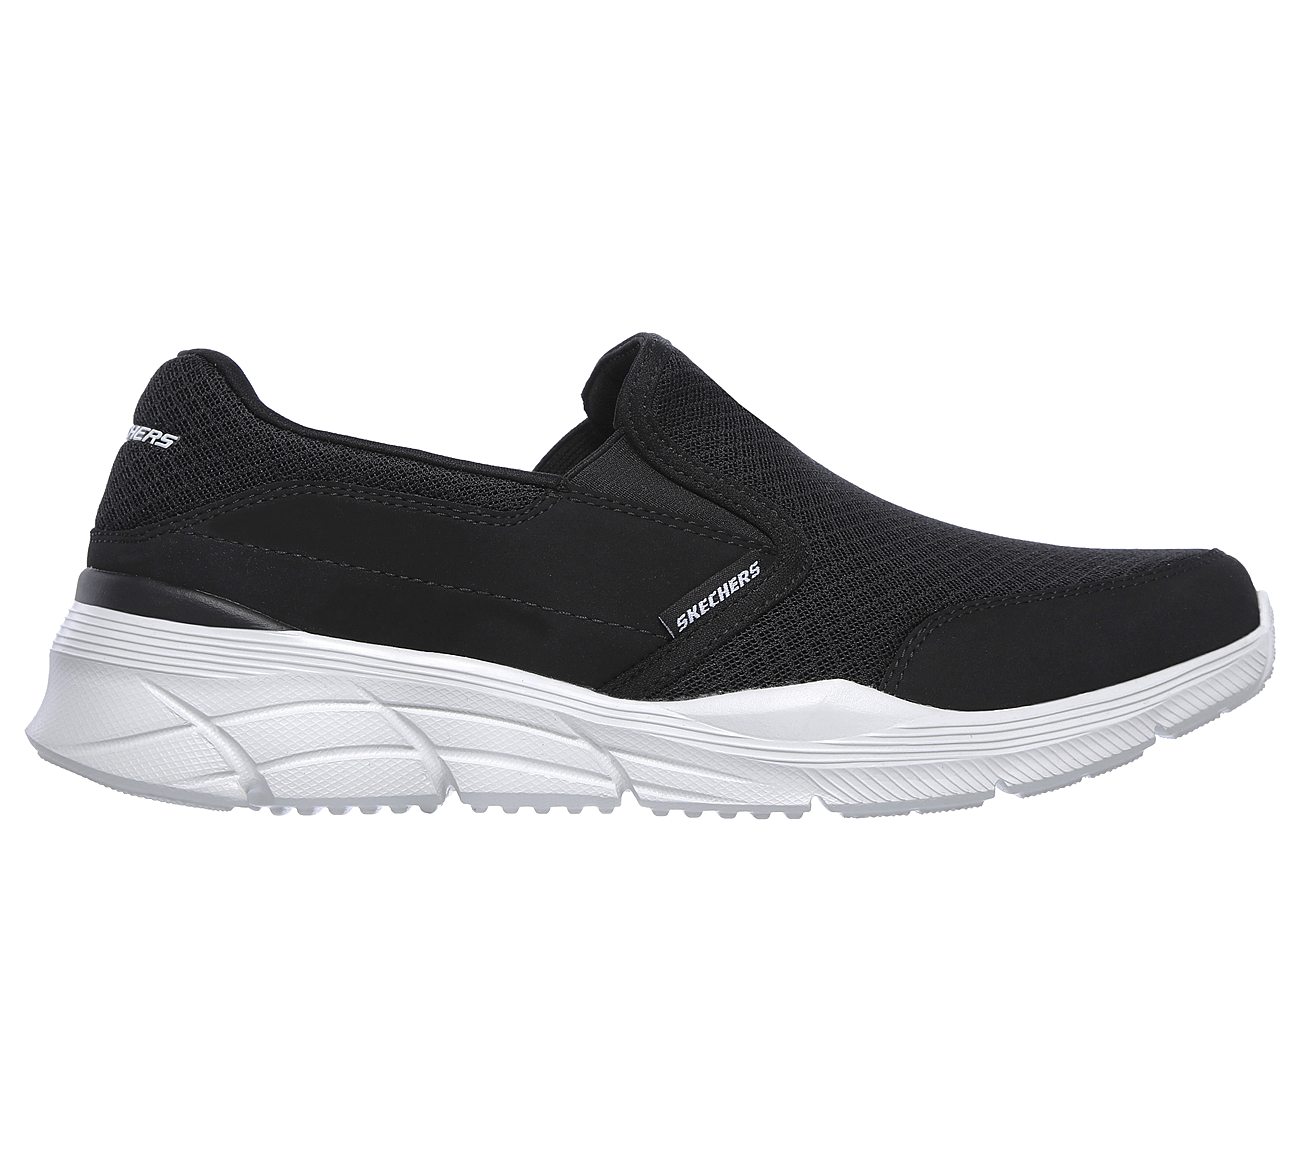 skechers relaxed